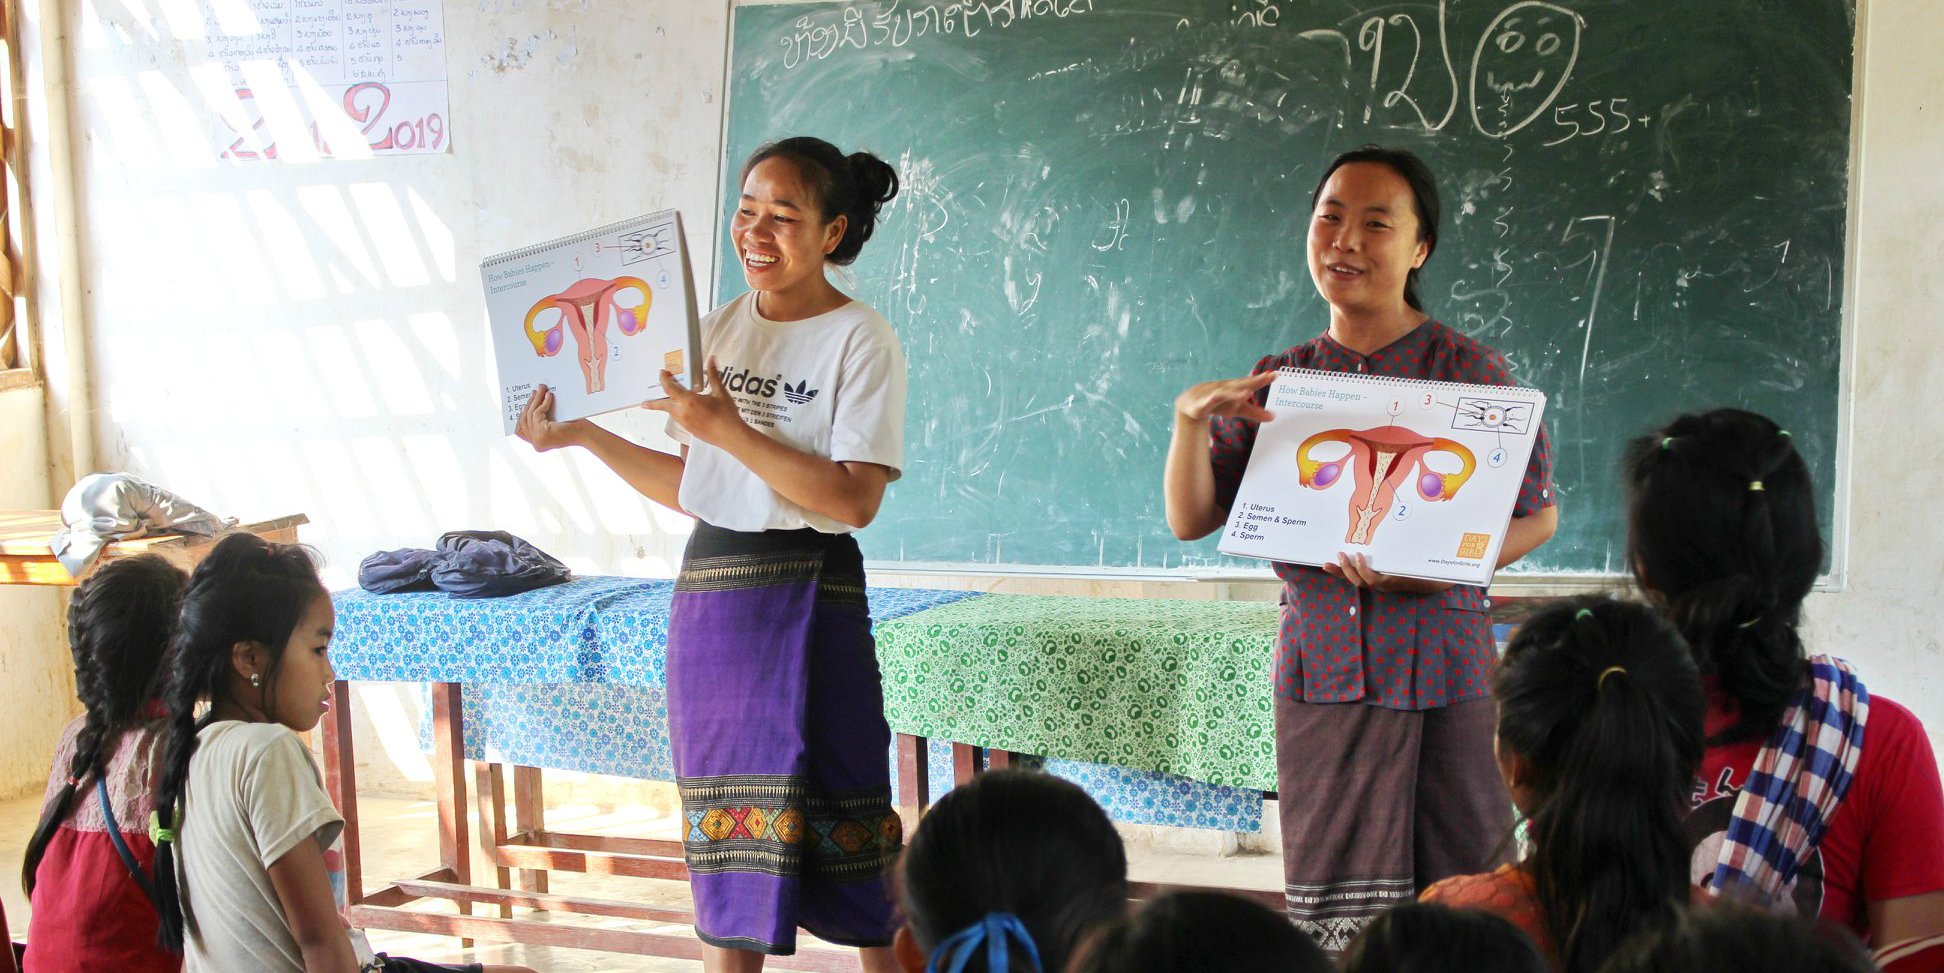 GVI-trained local leaders deliver a menstrual health workshop in Laos, as part of women's empowerment work.